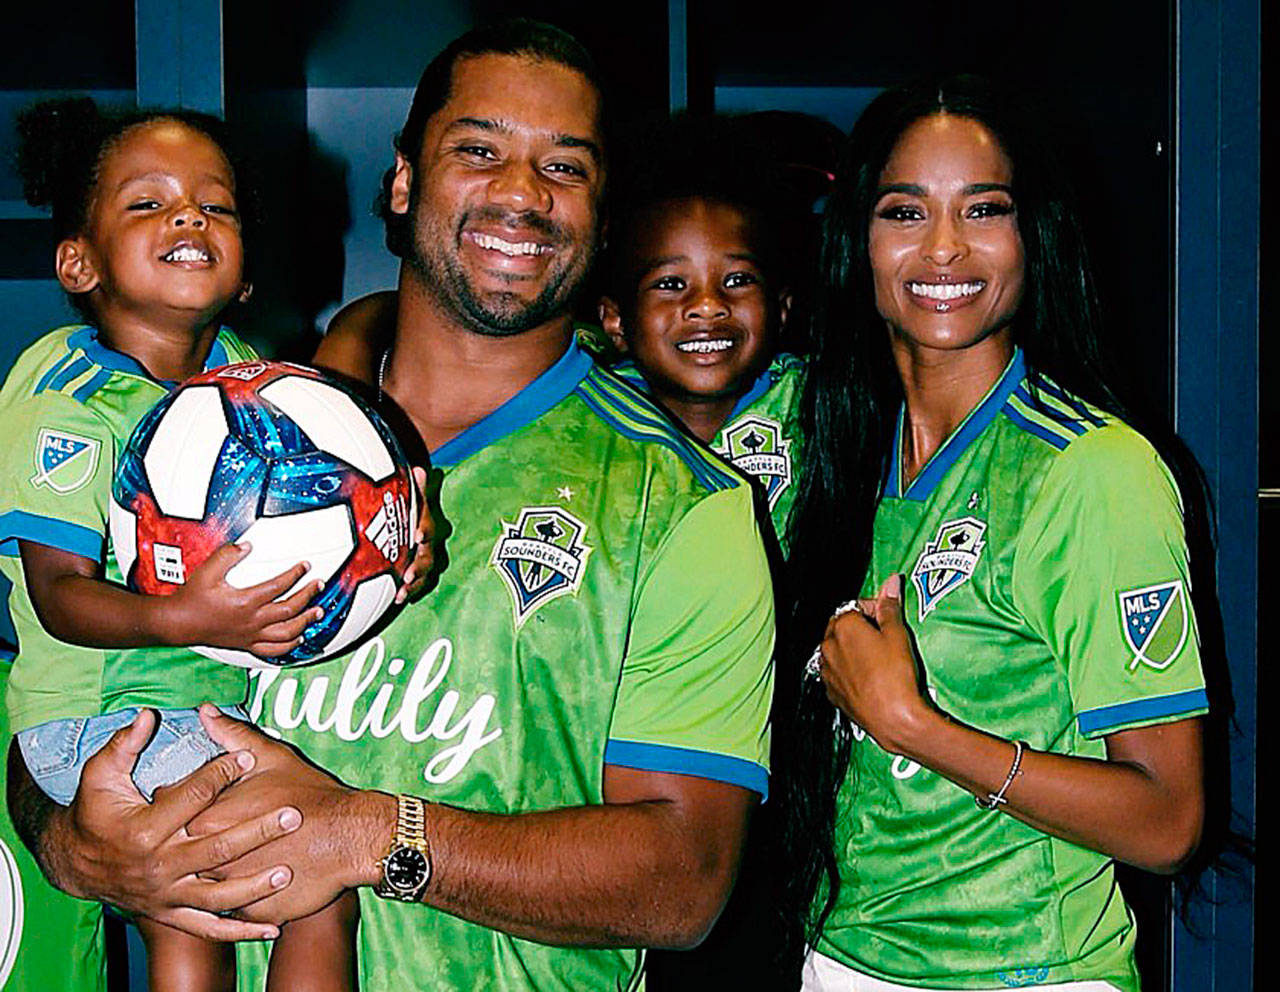 Seattle Seahawks’ quarterback Russell Wilson and his wife, Ciara, have joined the new ownership group of Major League Soccer’s Seattle Sounders, the team announced on Tuesday. (Tribune News Service)